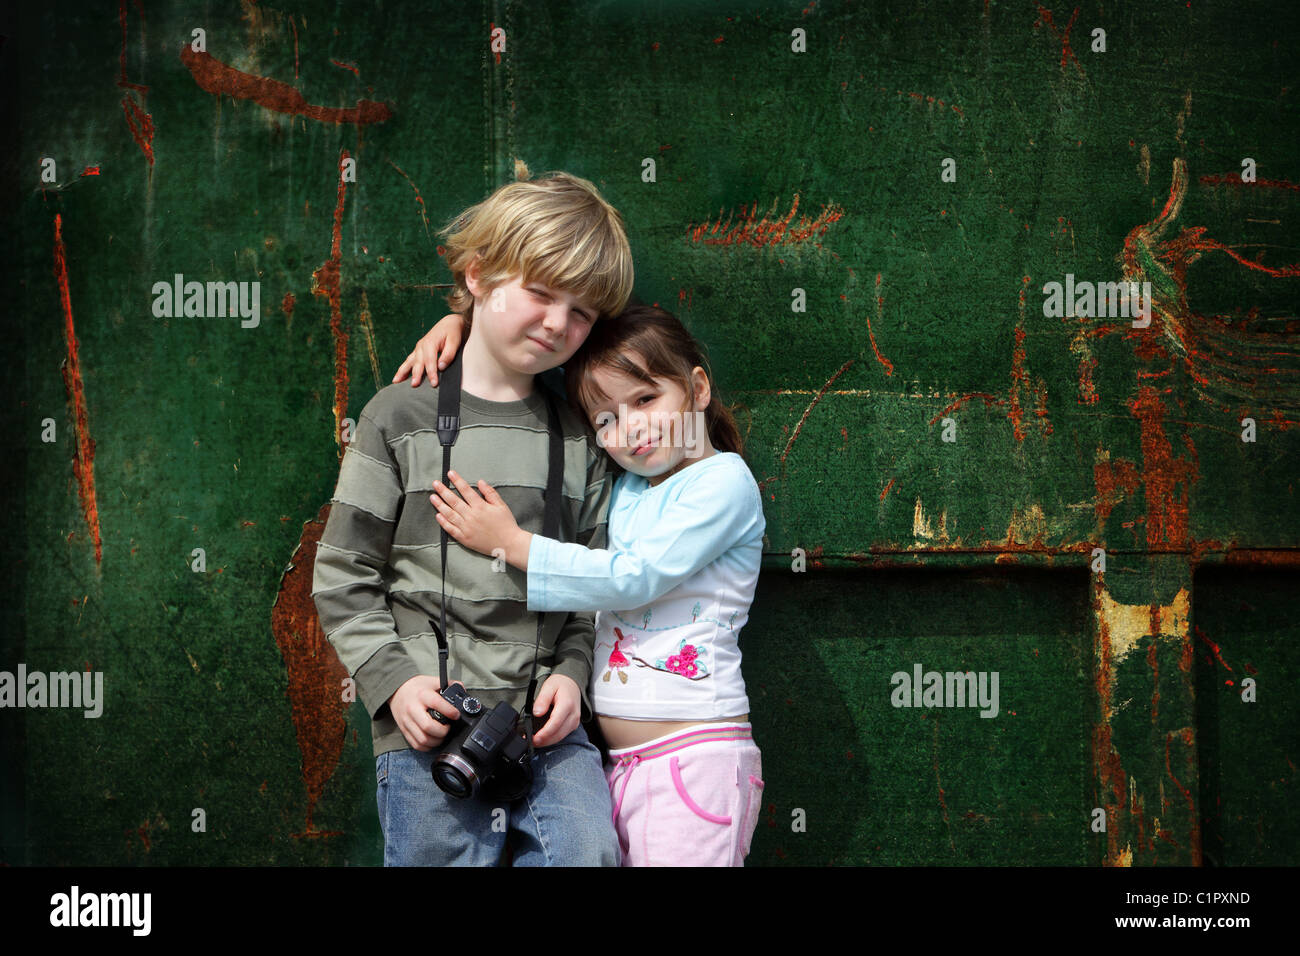 Two young children stand still while they have their photo taken against a grunge background and holding another camera Stock Photo